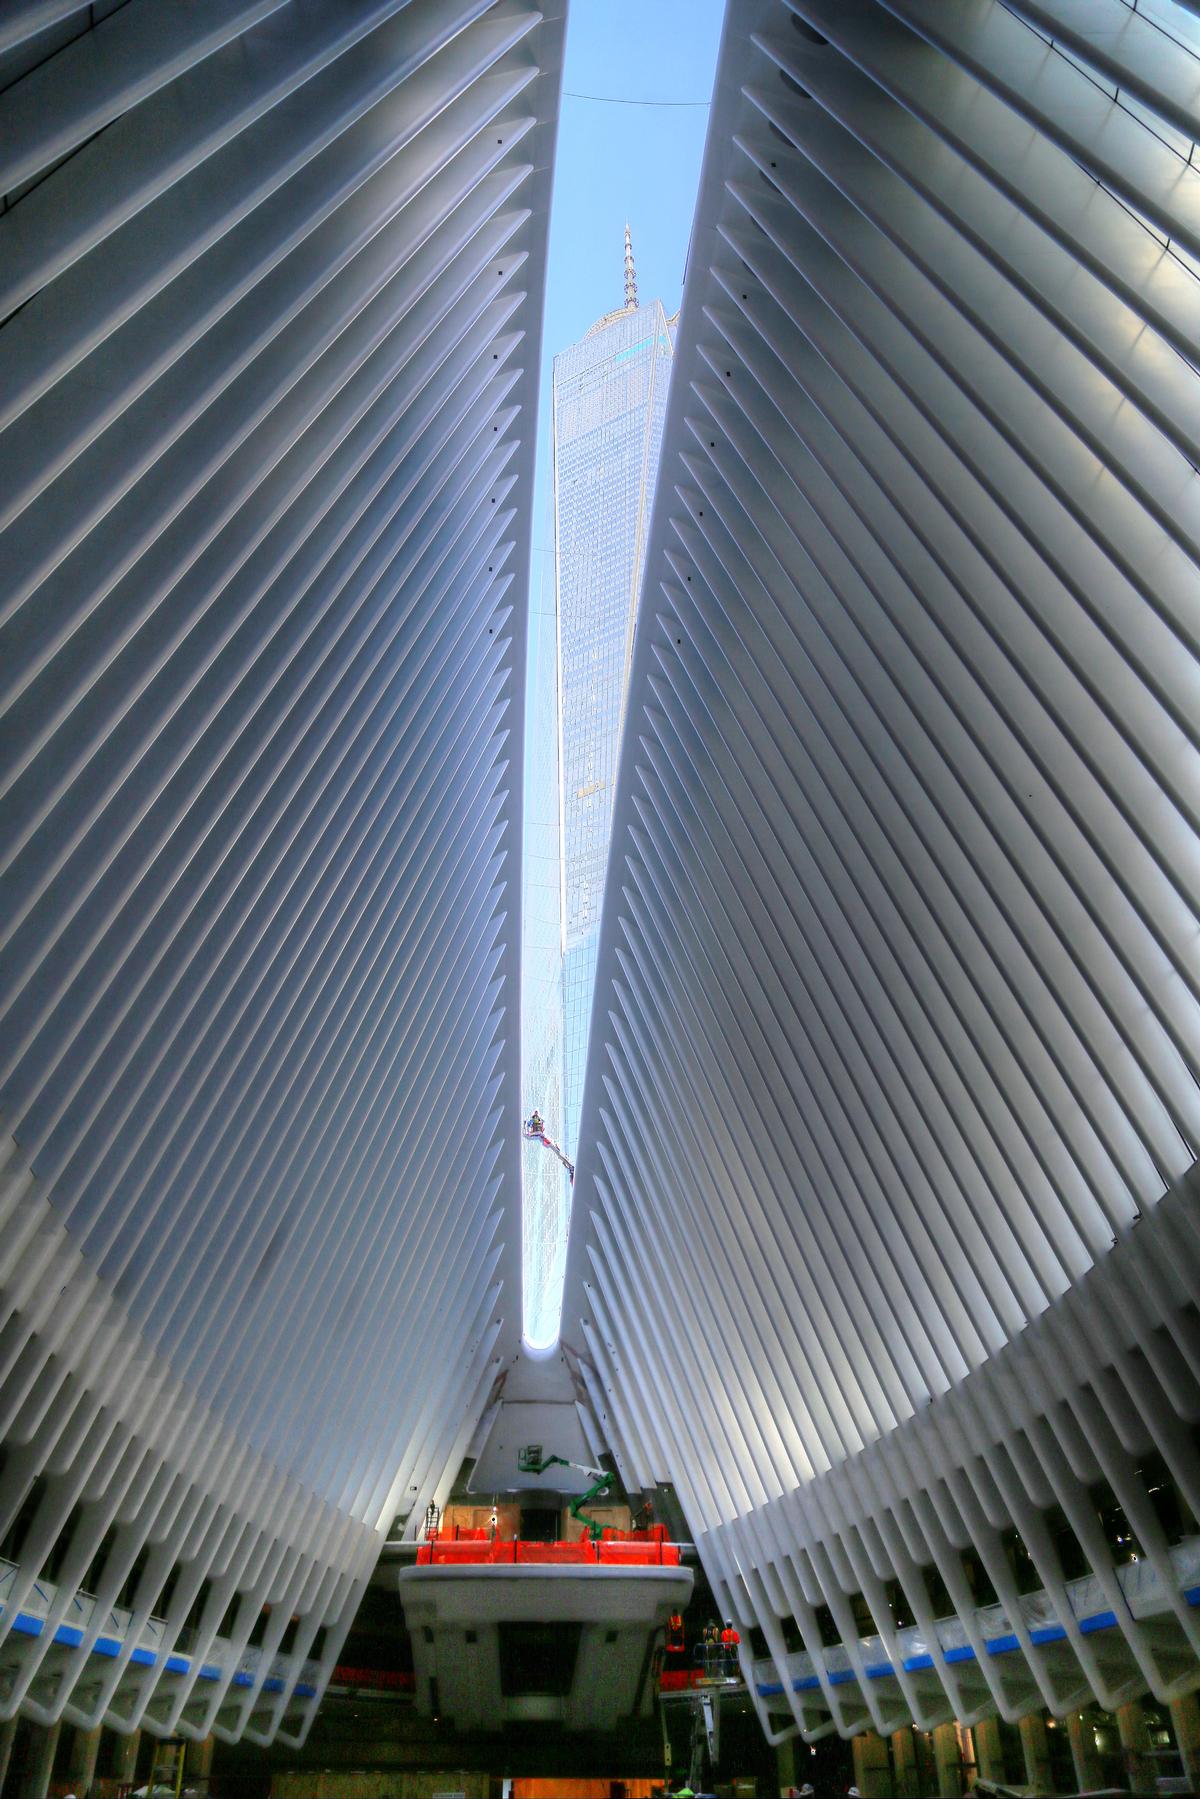 Calatrava said: 'The combination of natural light and sculptural form give dignity and beauty to the building’s lower levels and pedestrian walkways' / Port Authority of New York and New Jersey